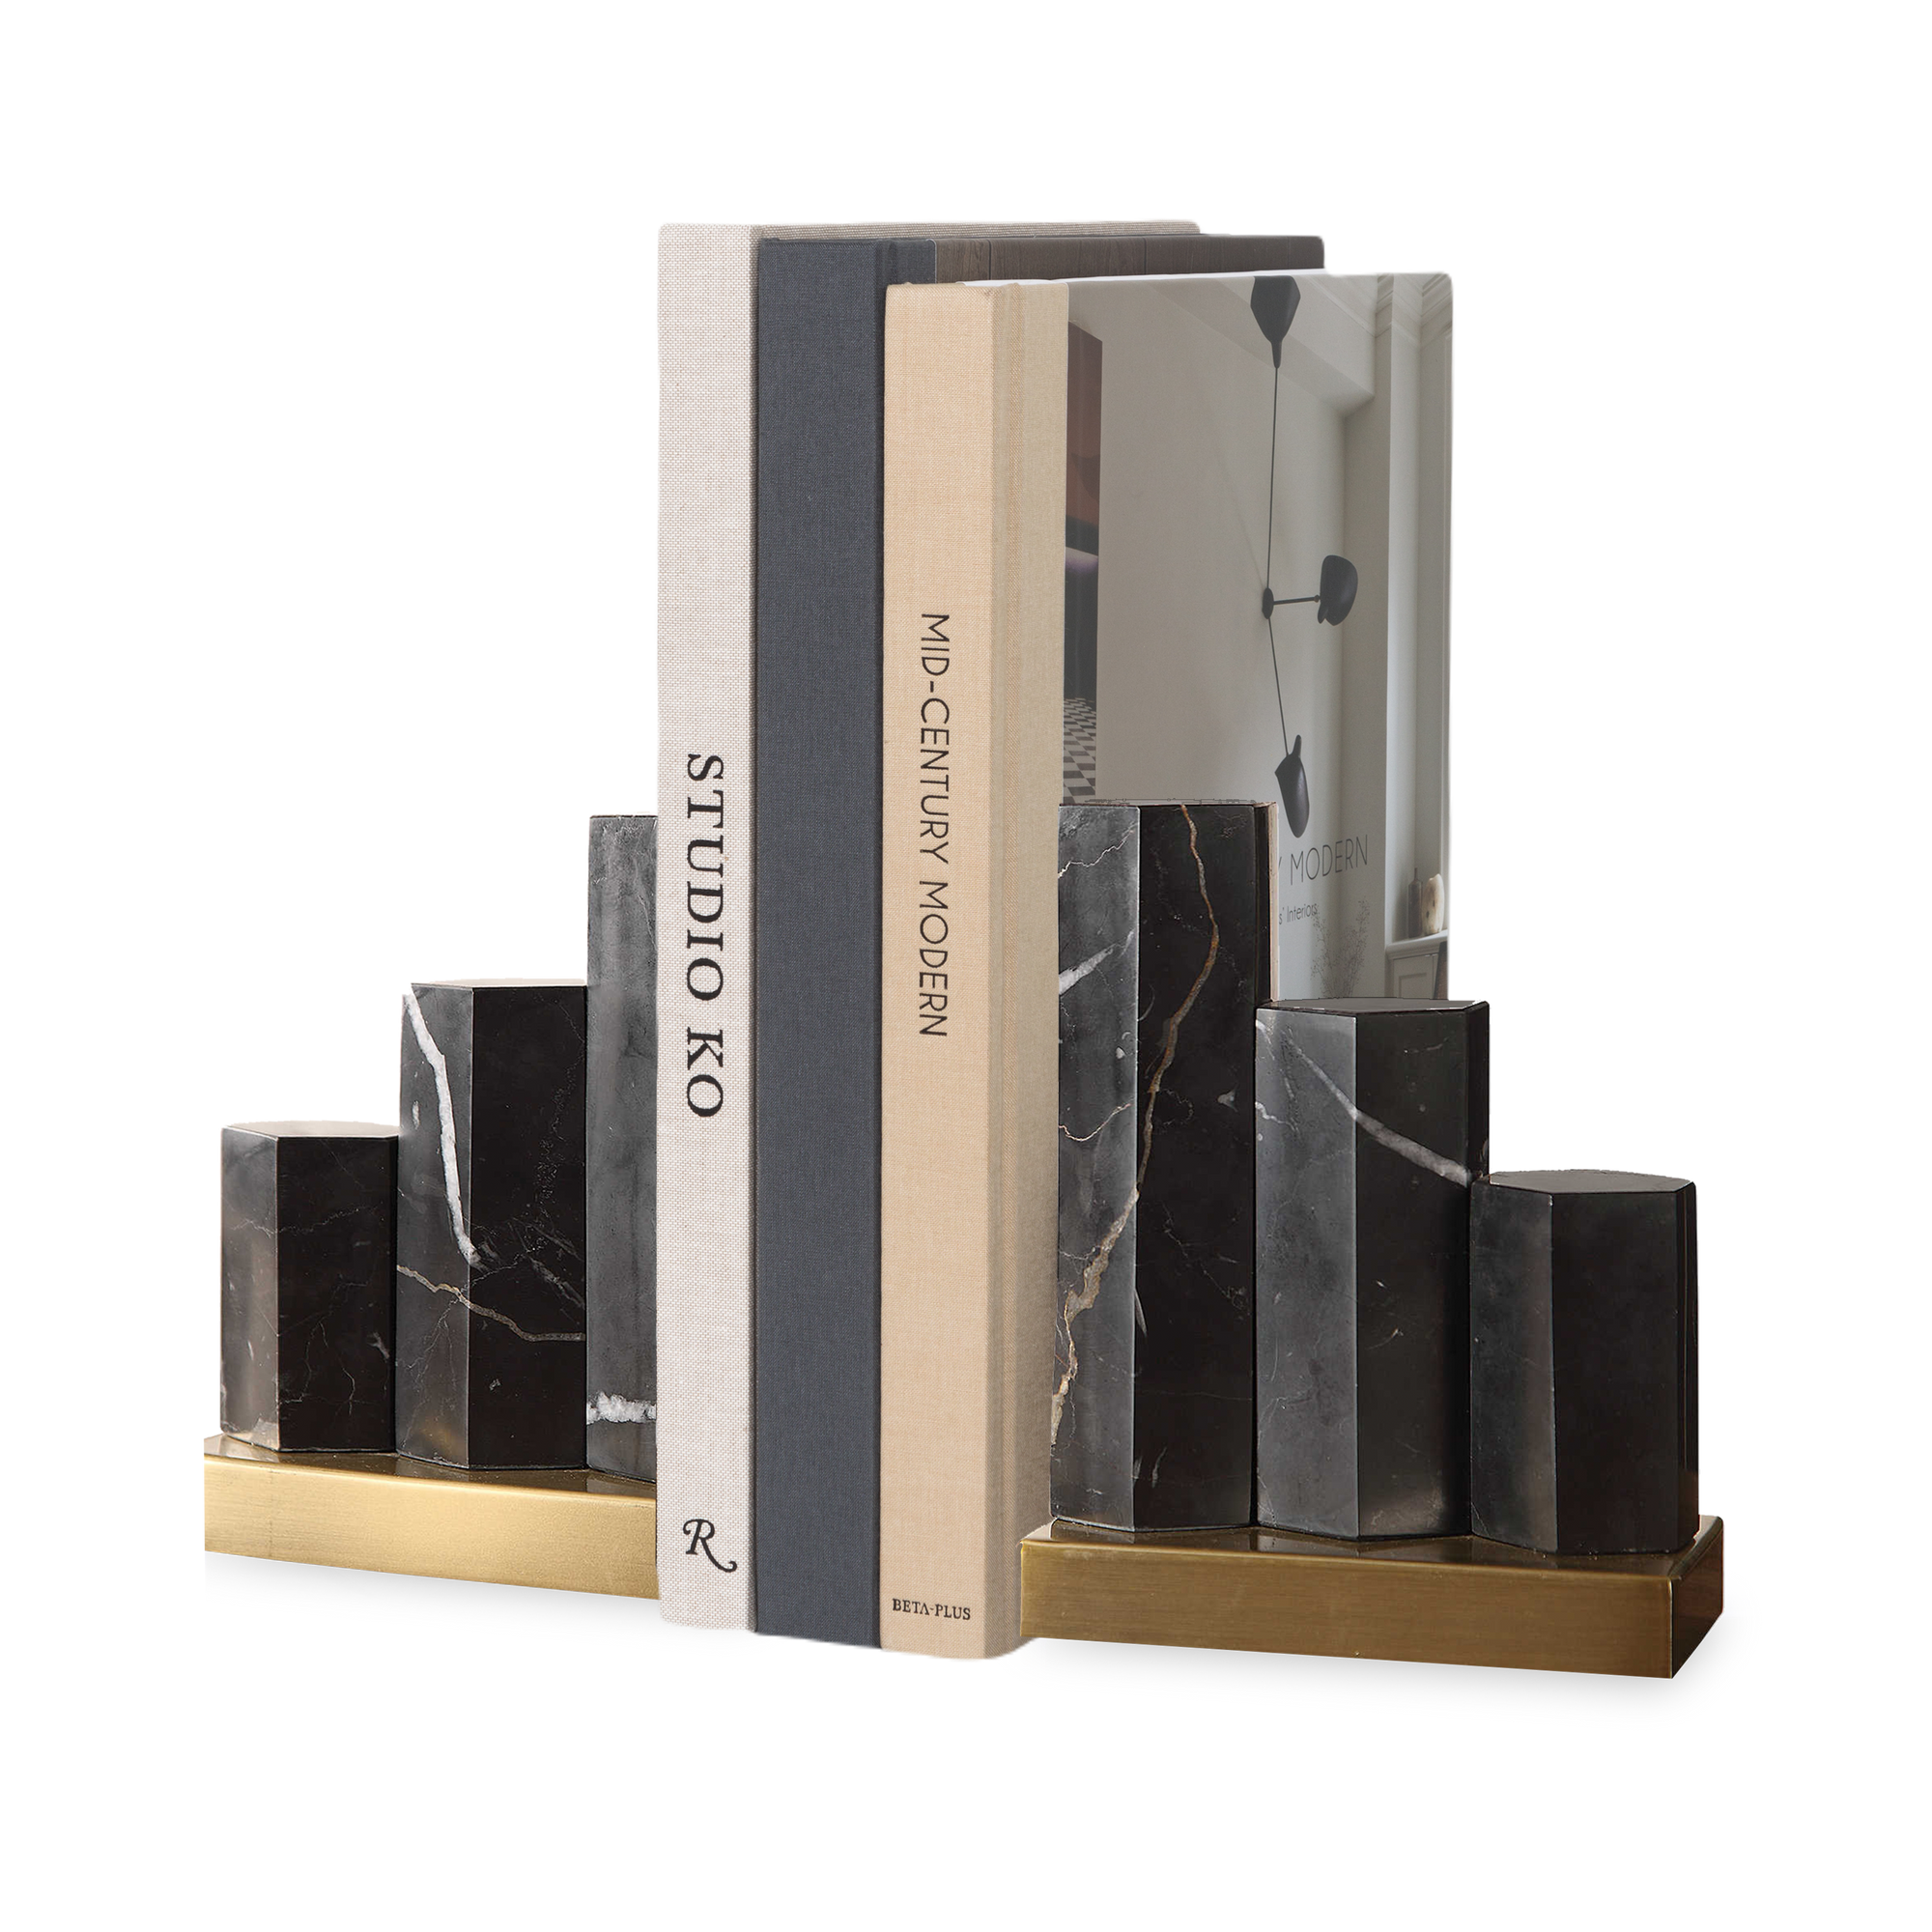 The Staggered Marble Bookends feature a staircase effect with staggered hexagonal marble pillars mounted on a sturdy brass base.